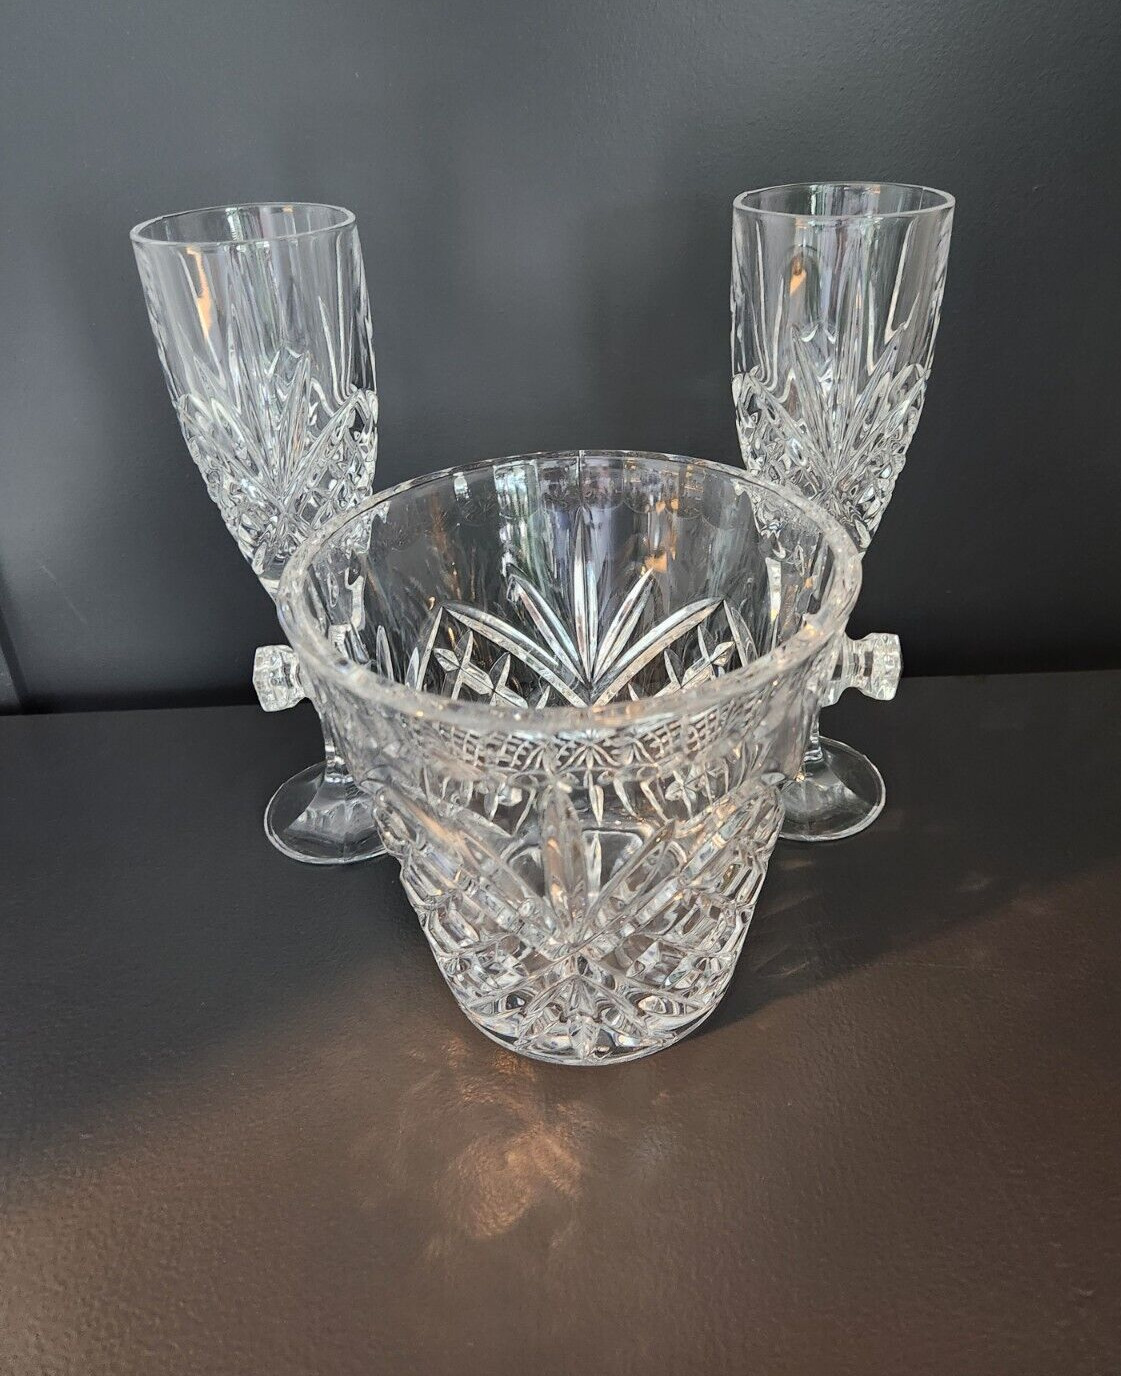 Royal Doulton Westminster Champagne Flutes and Ice bucket